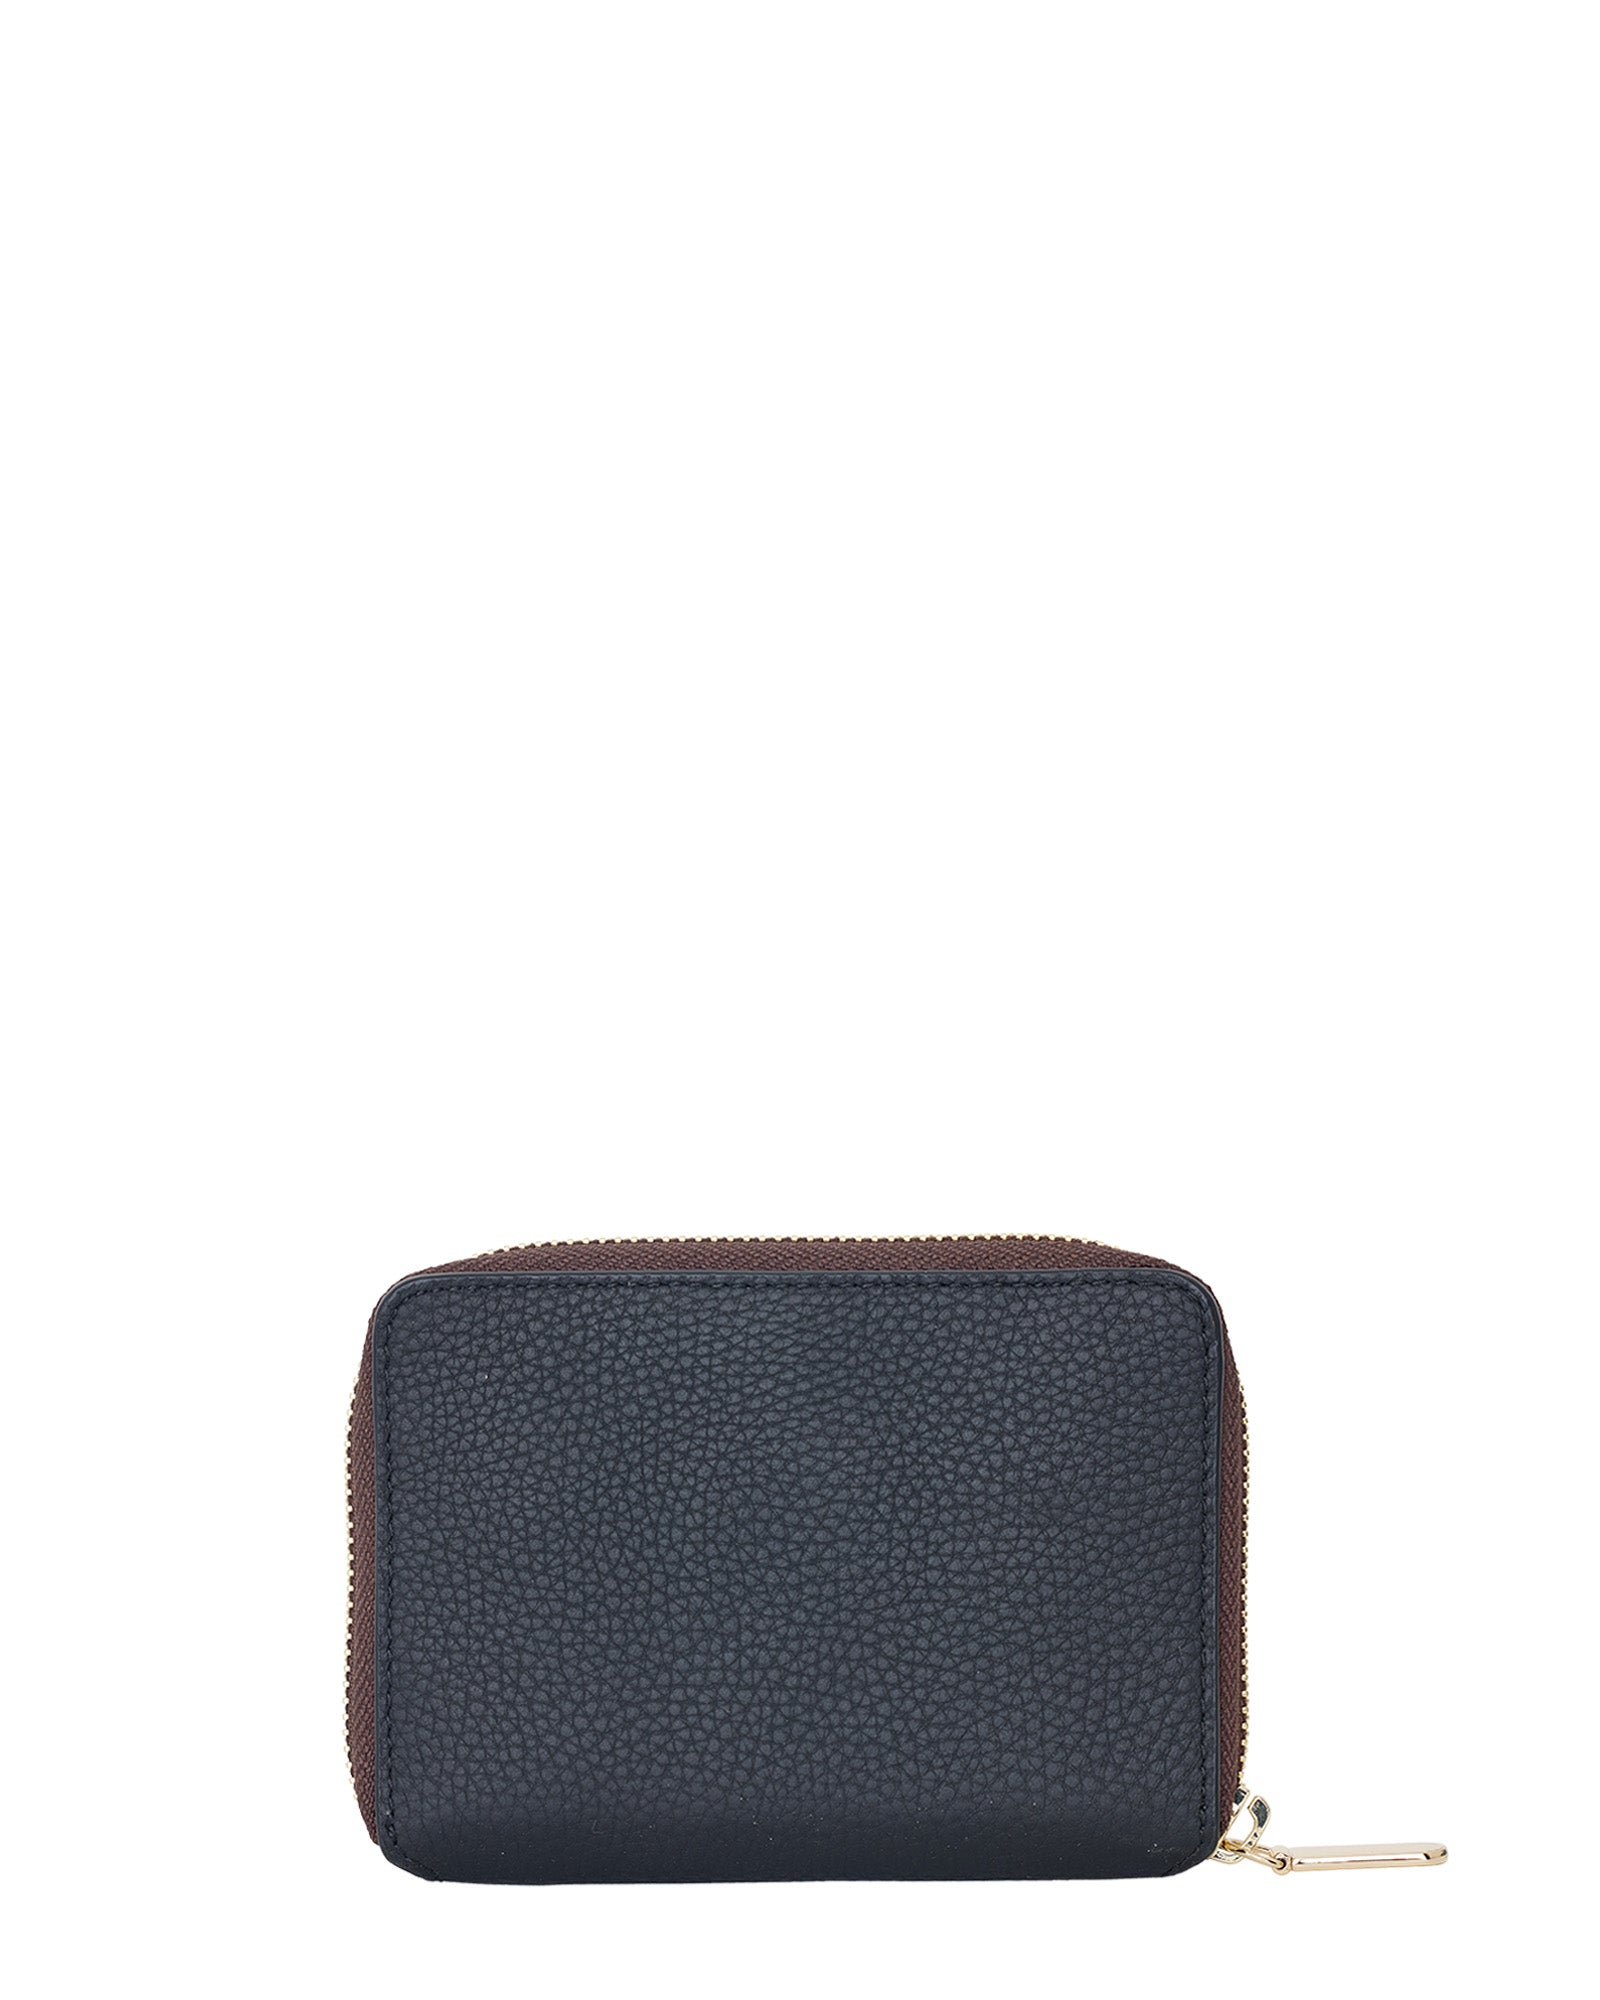 Landry Wallet | Saben Luxury Leather accessories and Handbags designed ...